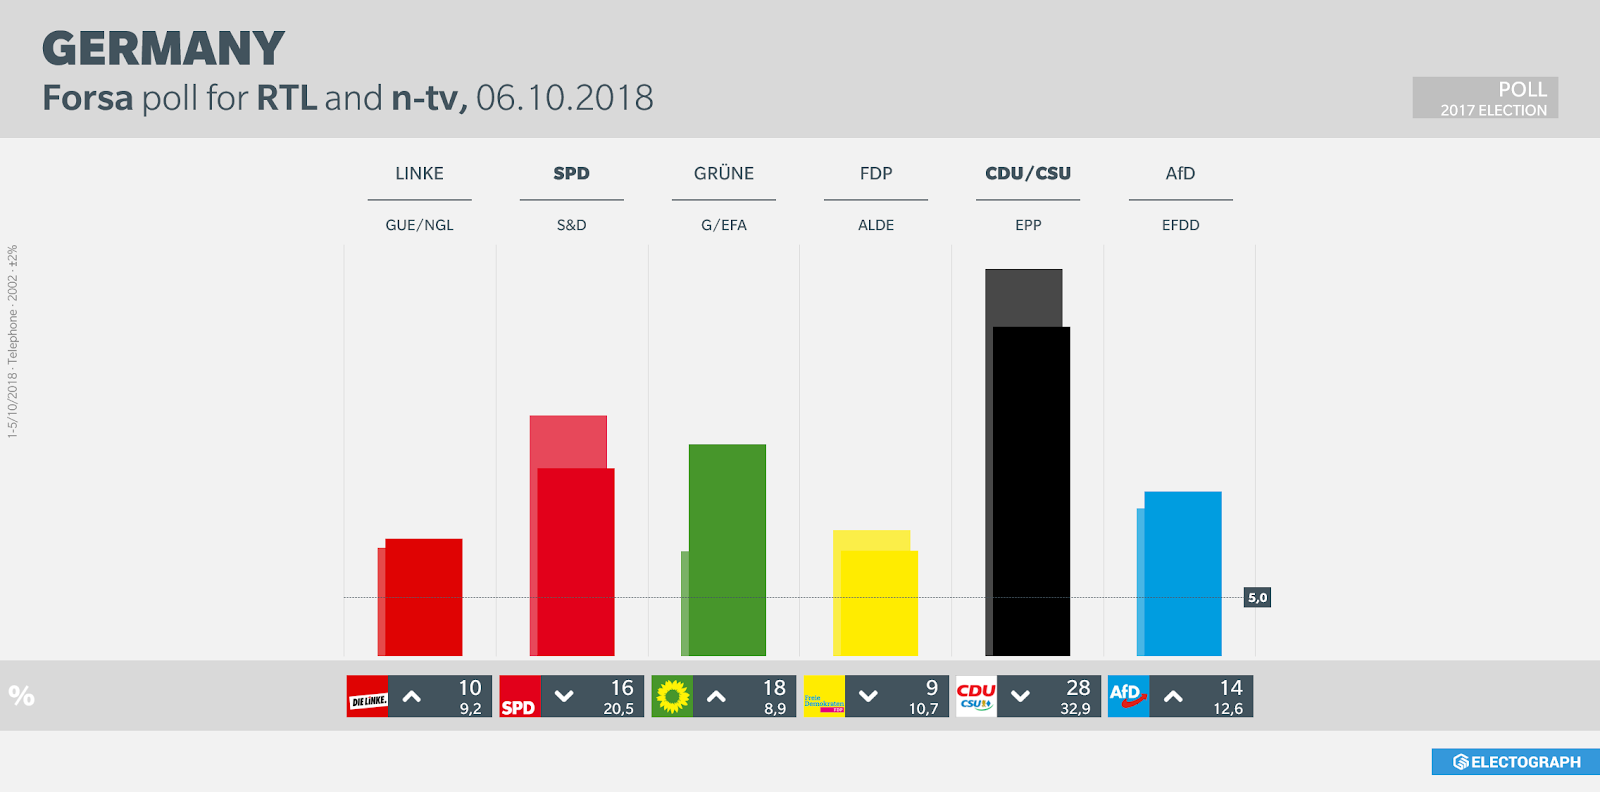 GERMANY: Forsa poll chart for RTL and n-tv, October 2018